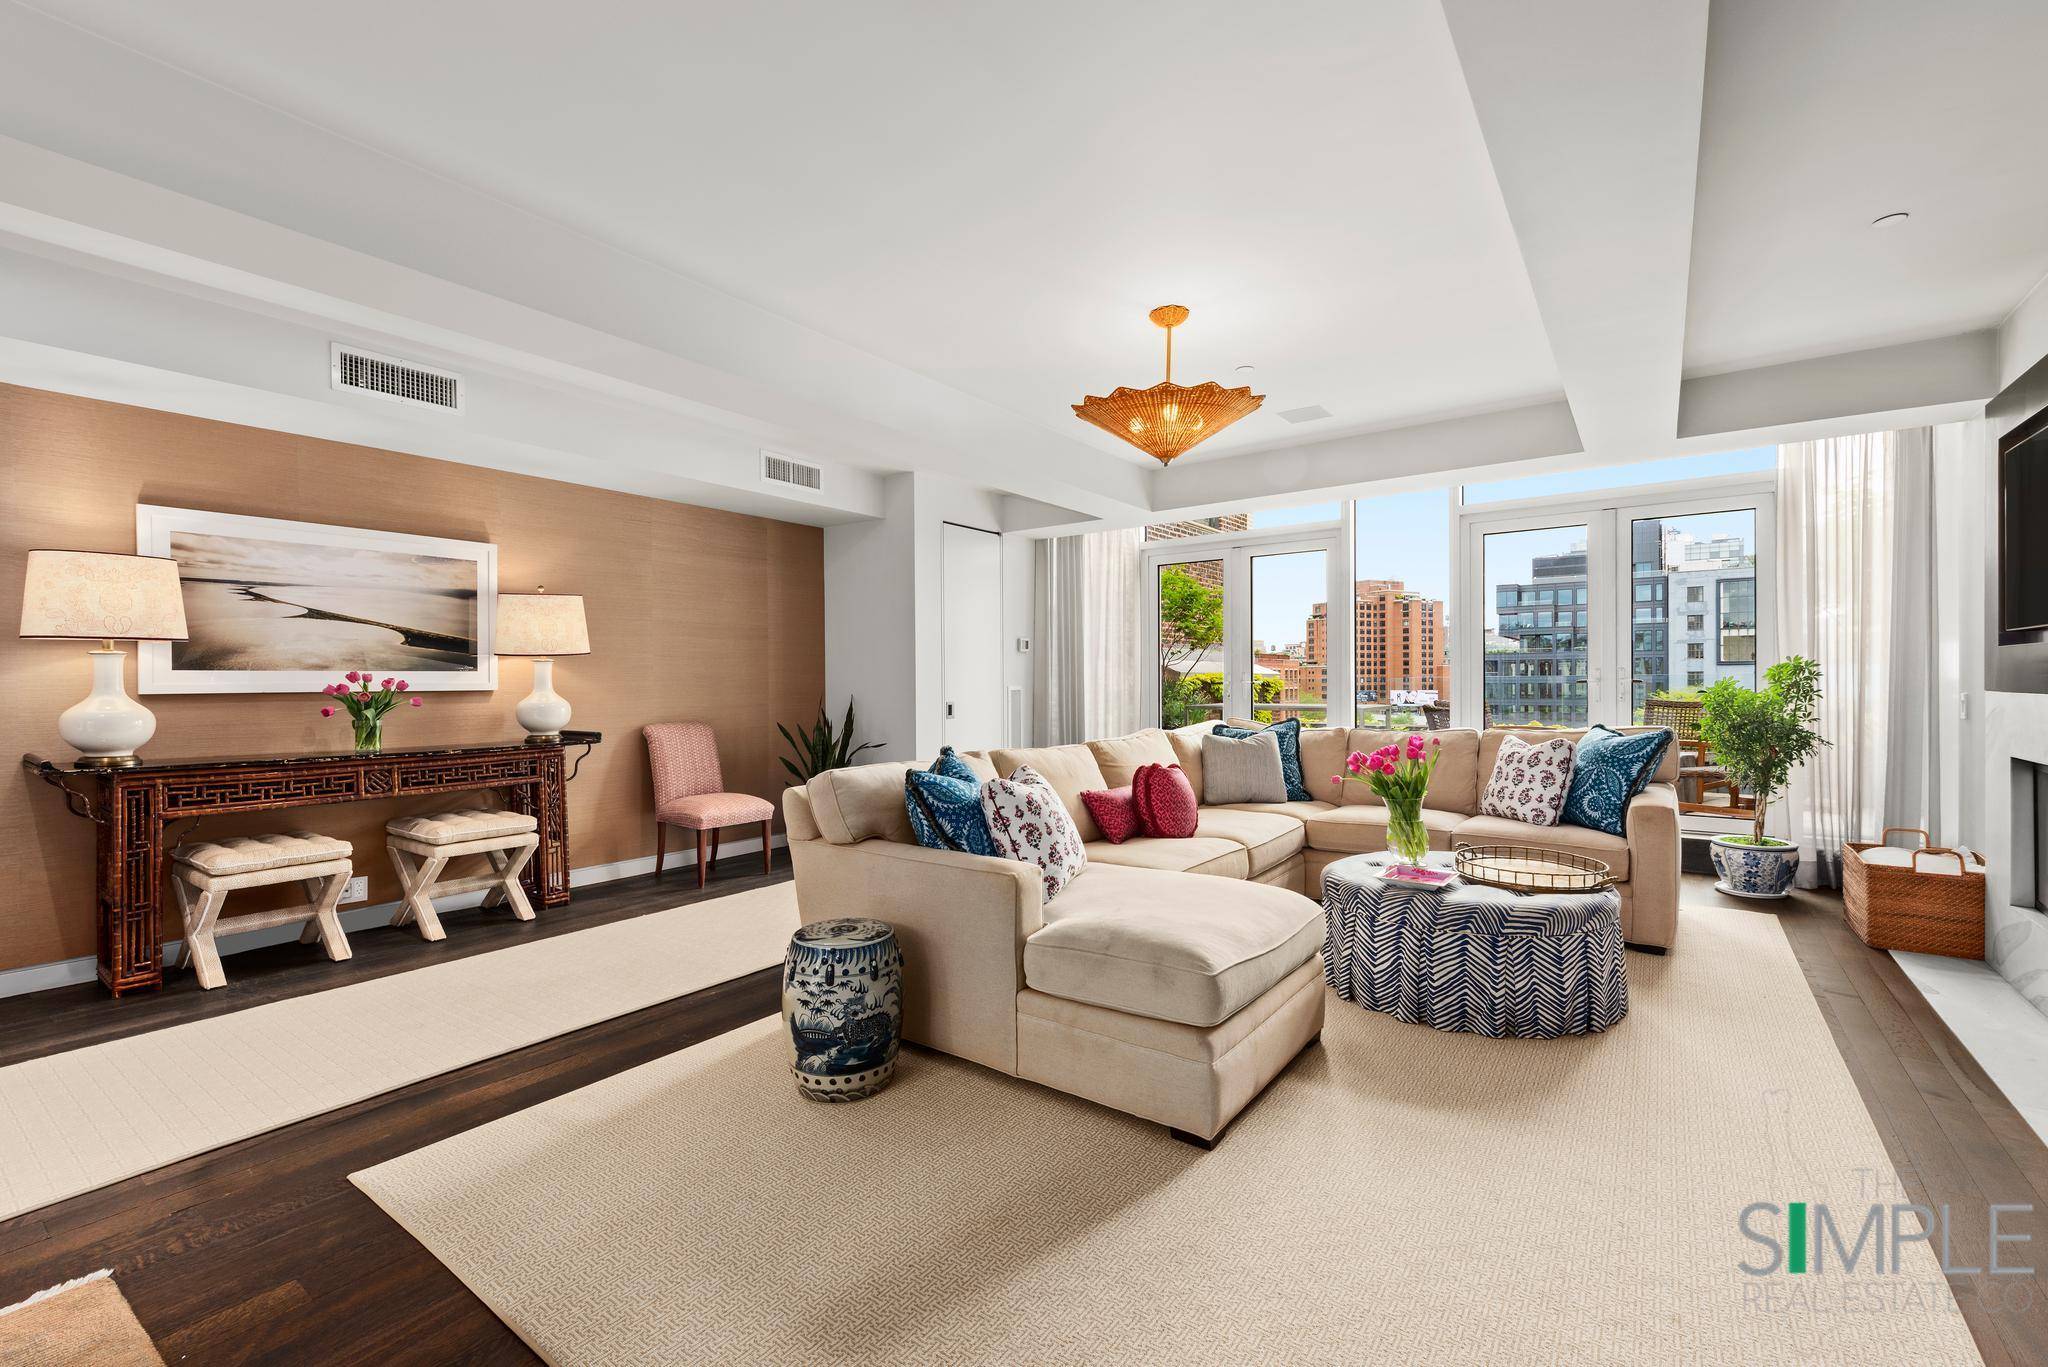 You must experience this one of a kind penthouse duplex to comprehend how it combines the expanse of a Tribeca loft with the intimacy of townhouse living perfected by three ...